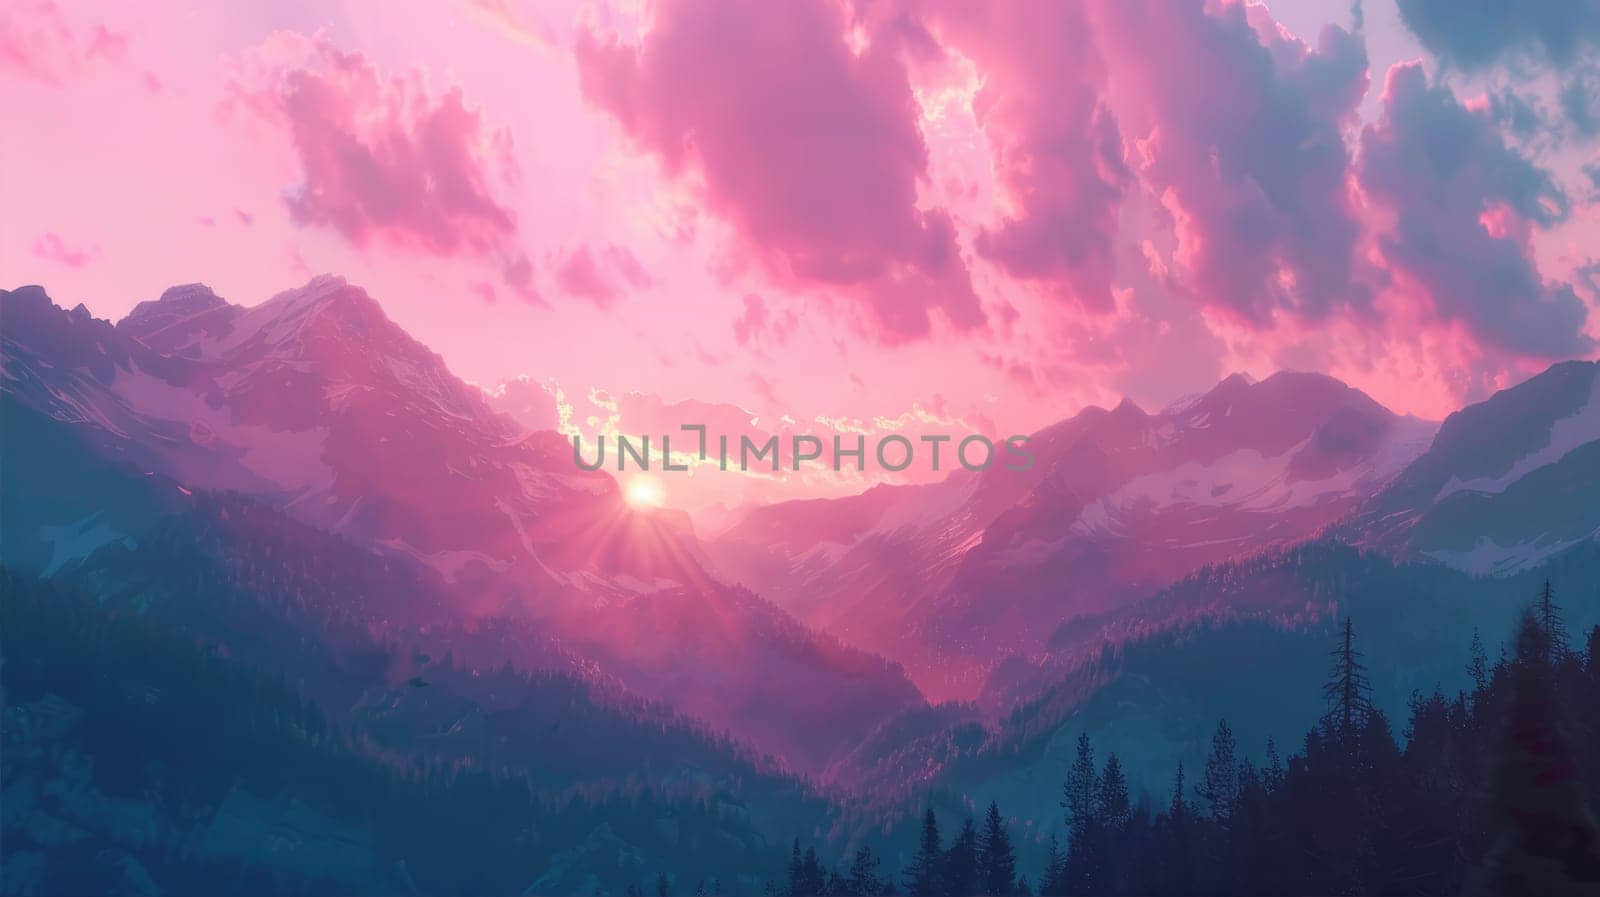 The sun is peeking through the clouds, casting a purple afterglow over the mountains in the ecoregion, creating a stunning natural landscape during dusk AI